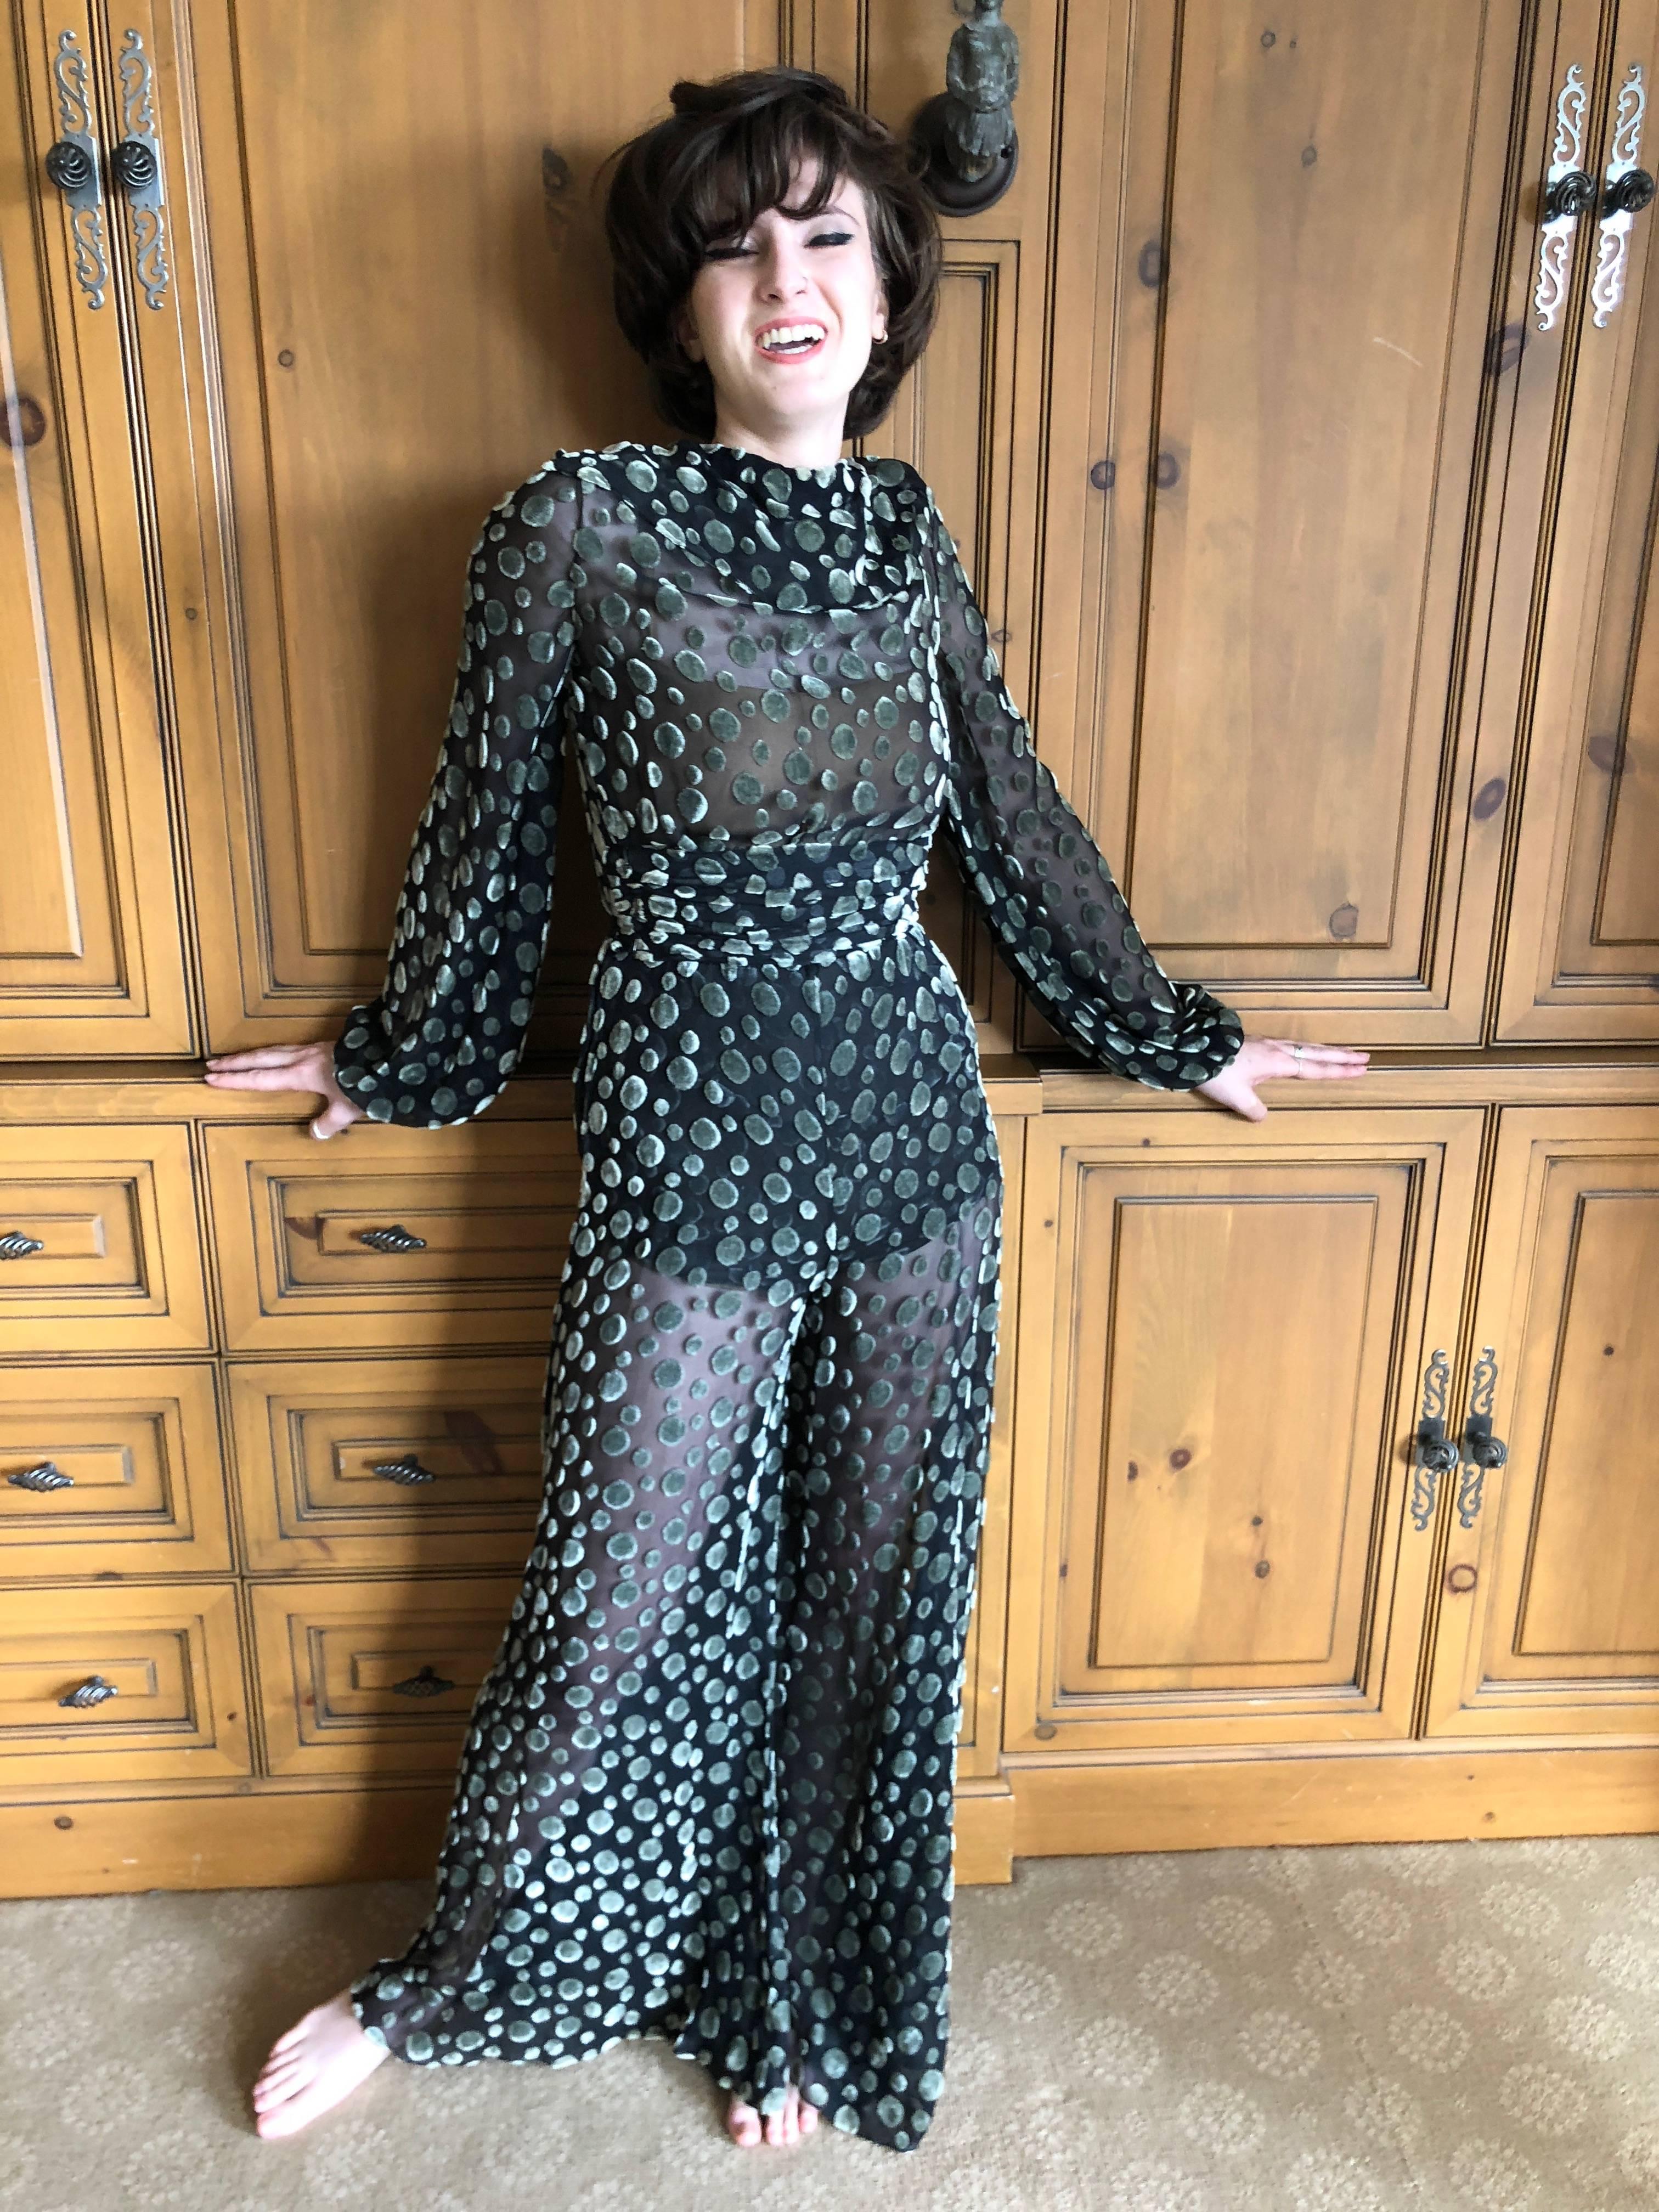 Cardinali 1974 Sheer Silk Devore Velvet Poet Sleeve Jumpsuit

From the Archive of Marilyn Lewis, the creator of Cardinali
Cardinali was founded in Los Angeles in 1970, by Marilyn Lewis, who had already found success as the founder and owner of the